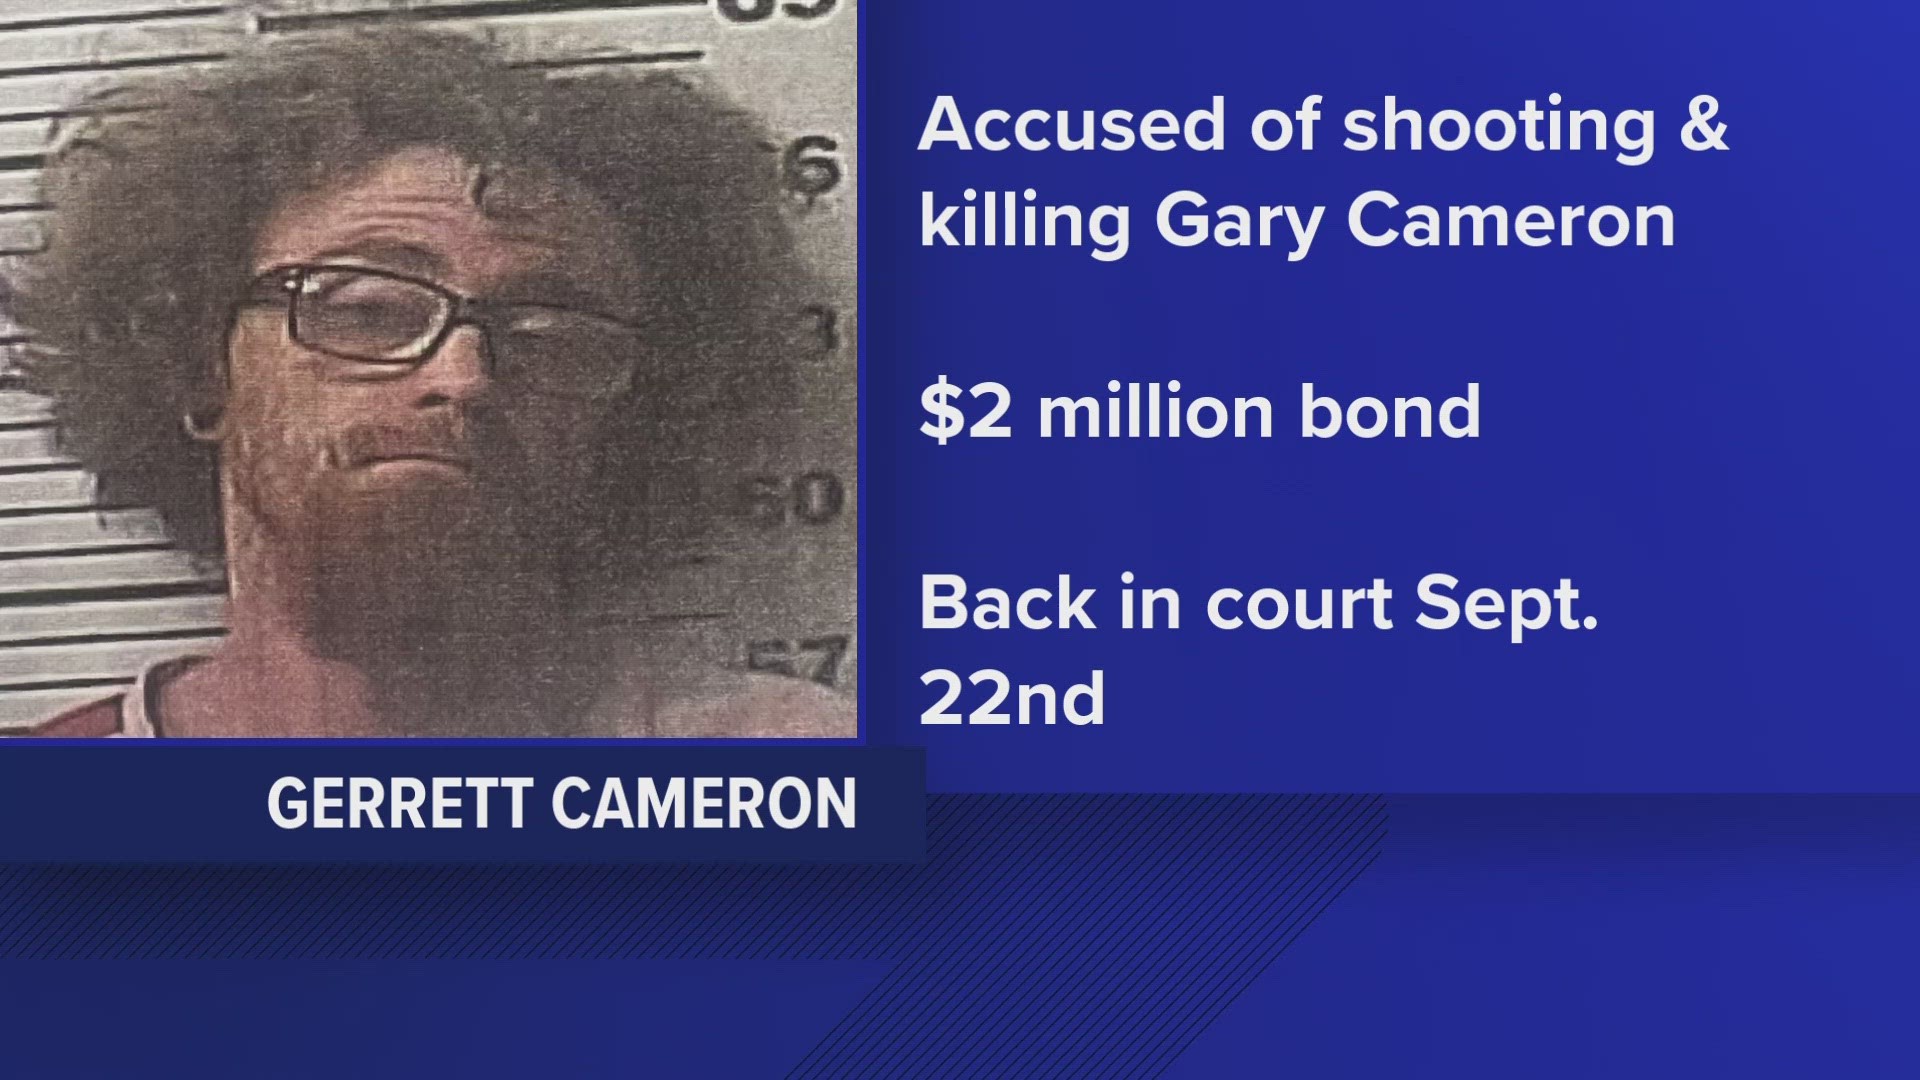 Garrett Cameron's bond was set at $2 million and was taken to the Blount County Detention Center, officials said.